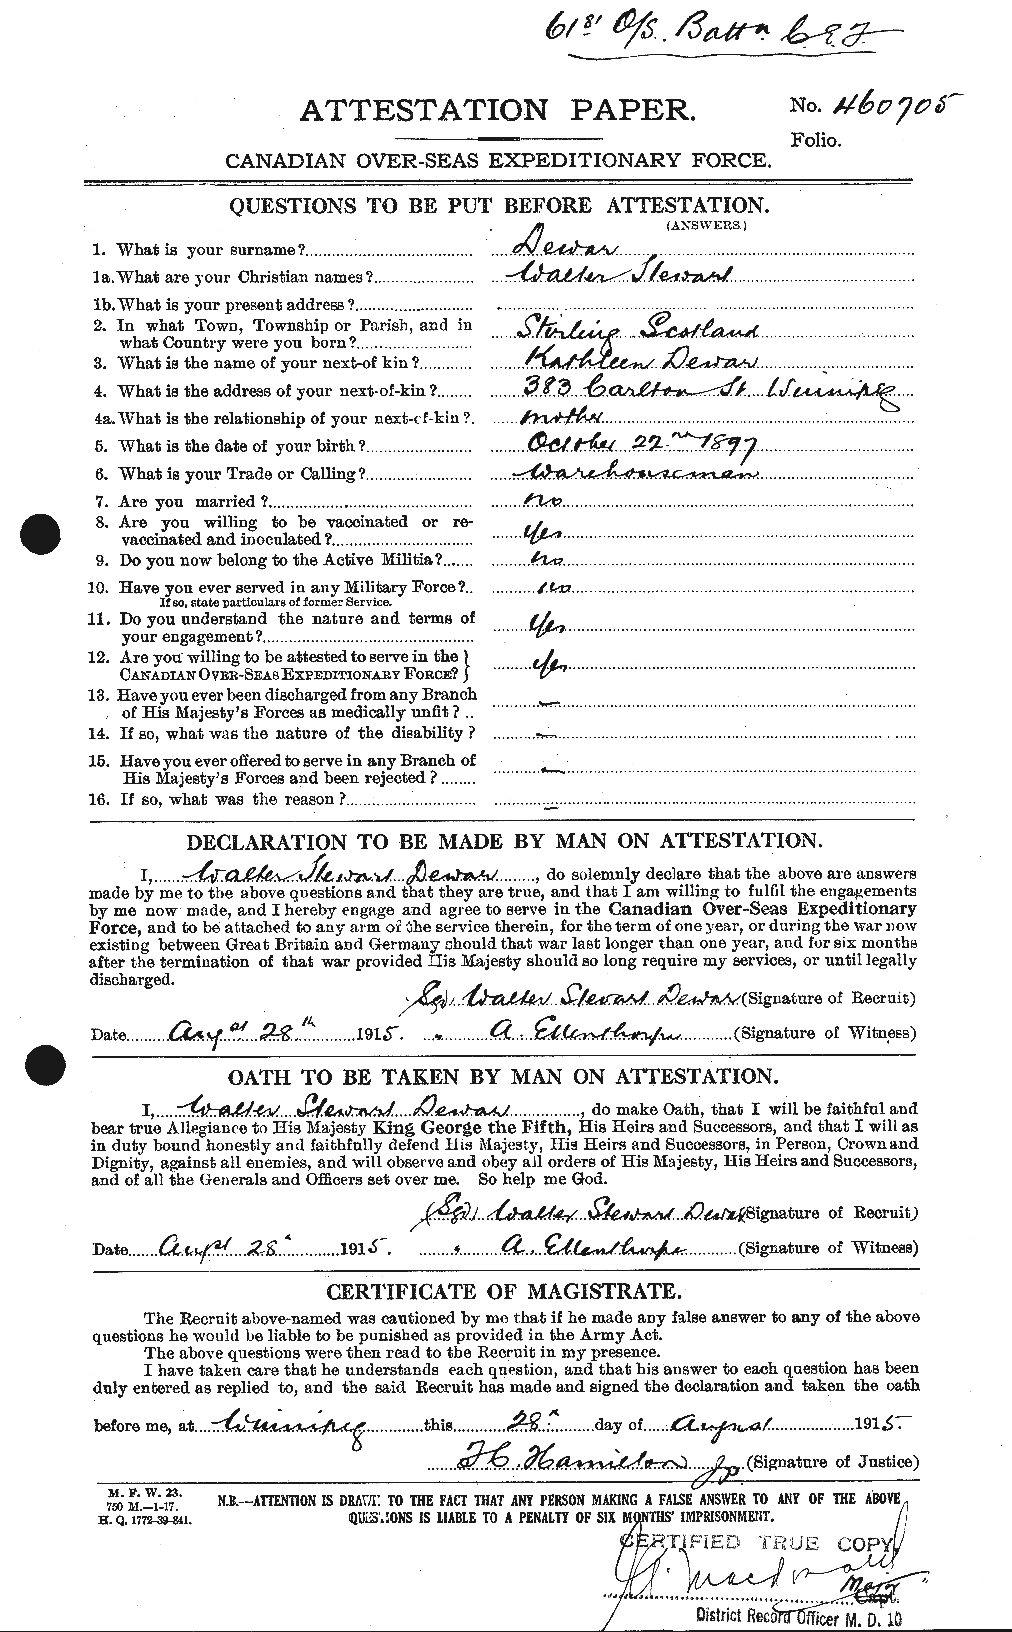 Personnel Records of the First World War - CEF 288681a